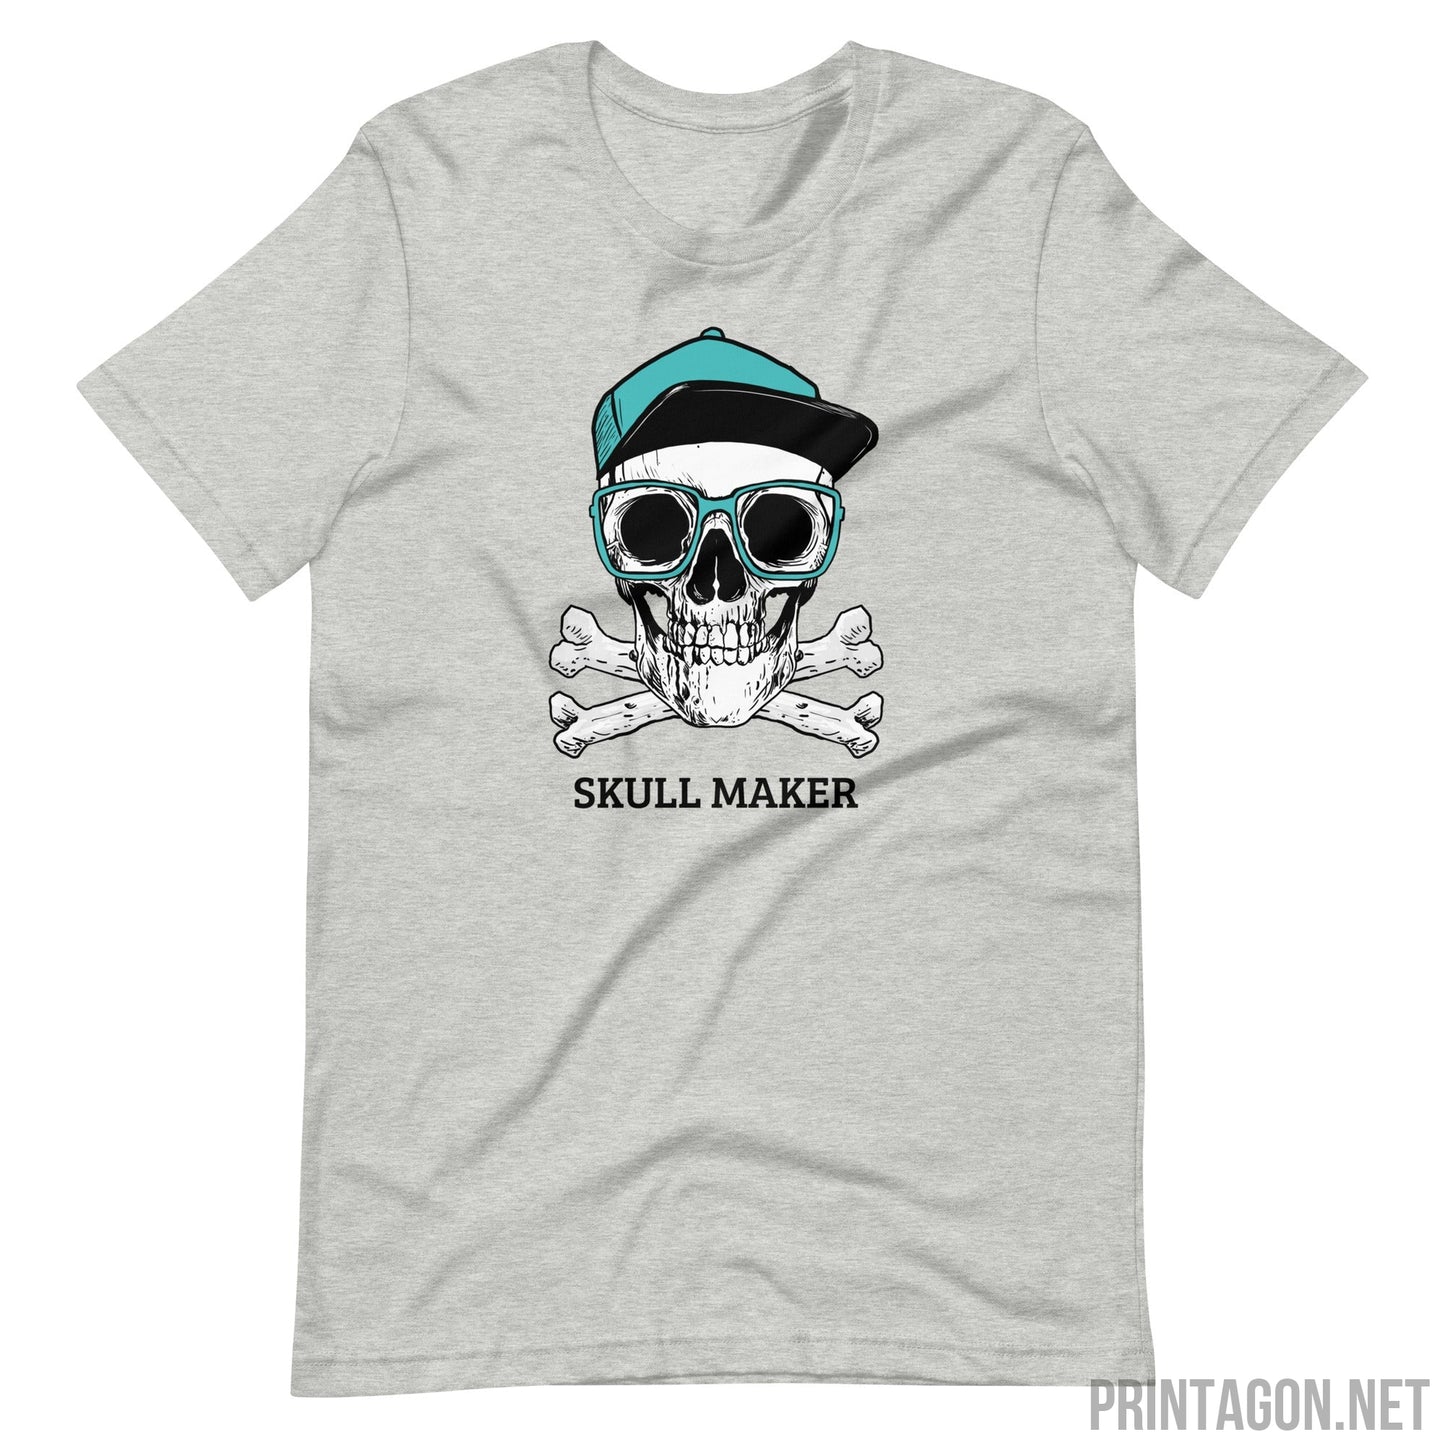 Printagon - Skull Maker with Glasses - Athletic Heather / XS